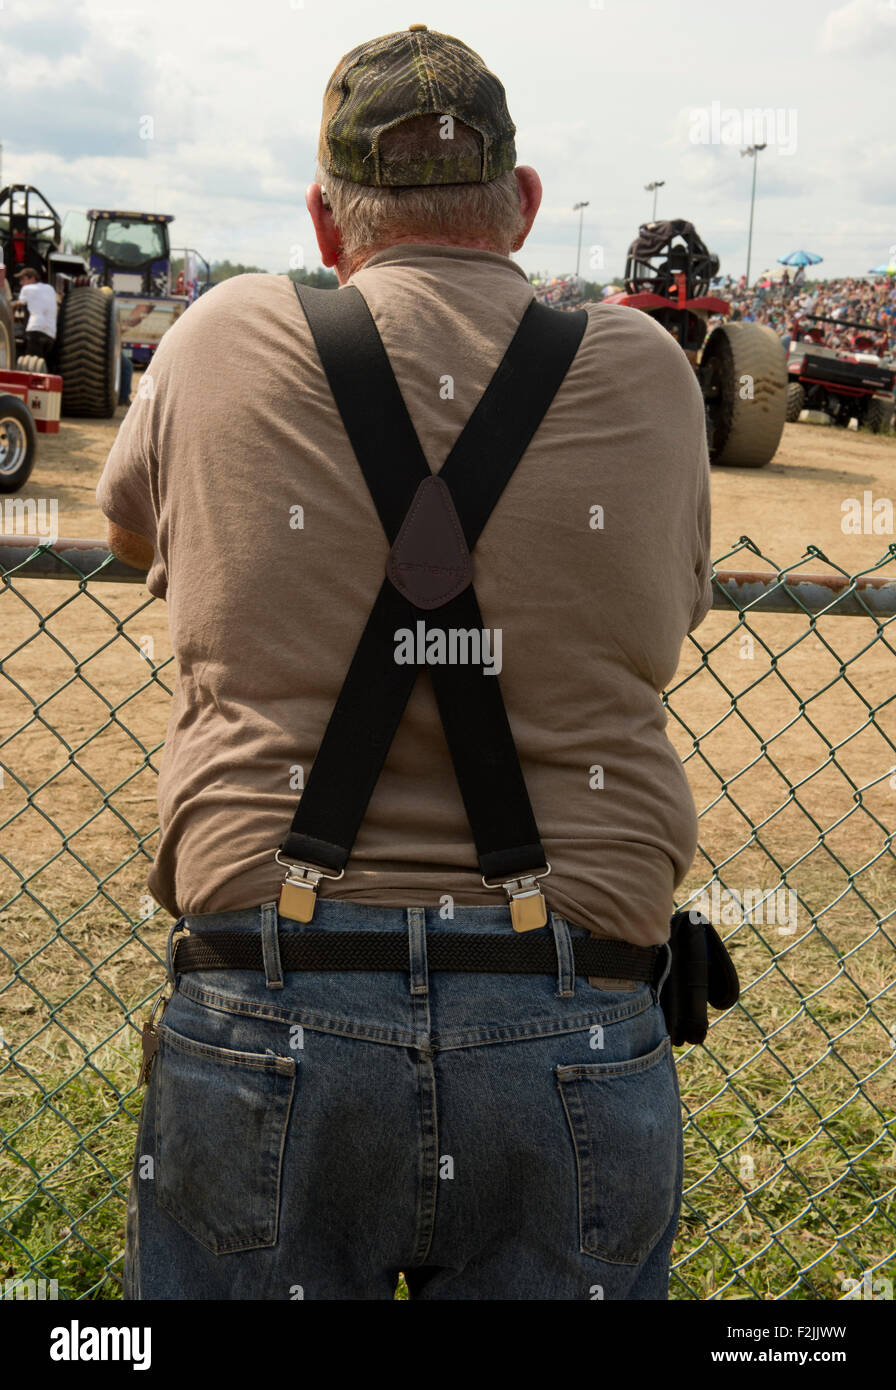 A man wearing suspenders and jeans watching the tractor pulling event at the Washington County Fair in Greenwich, New York State Stock Photo